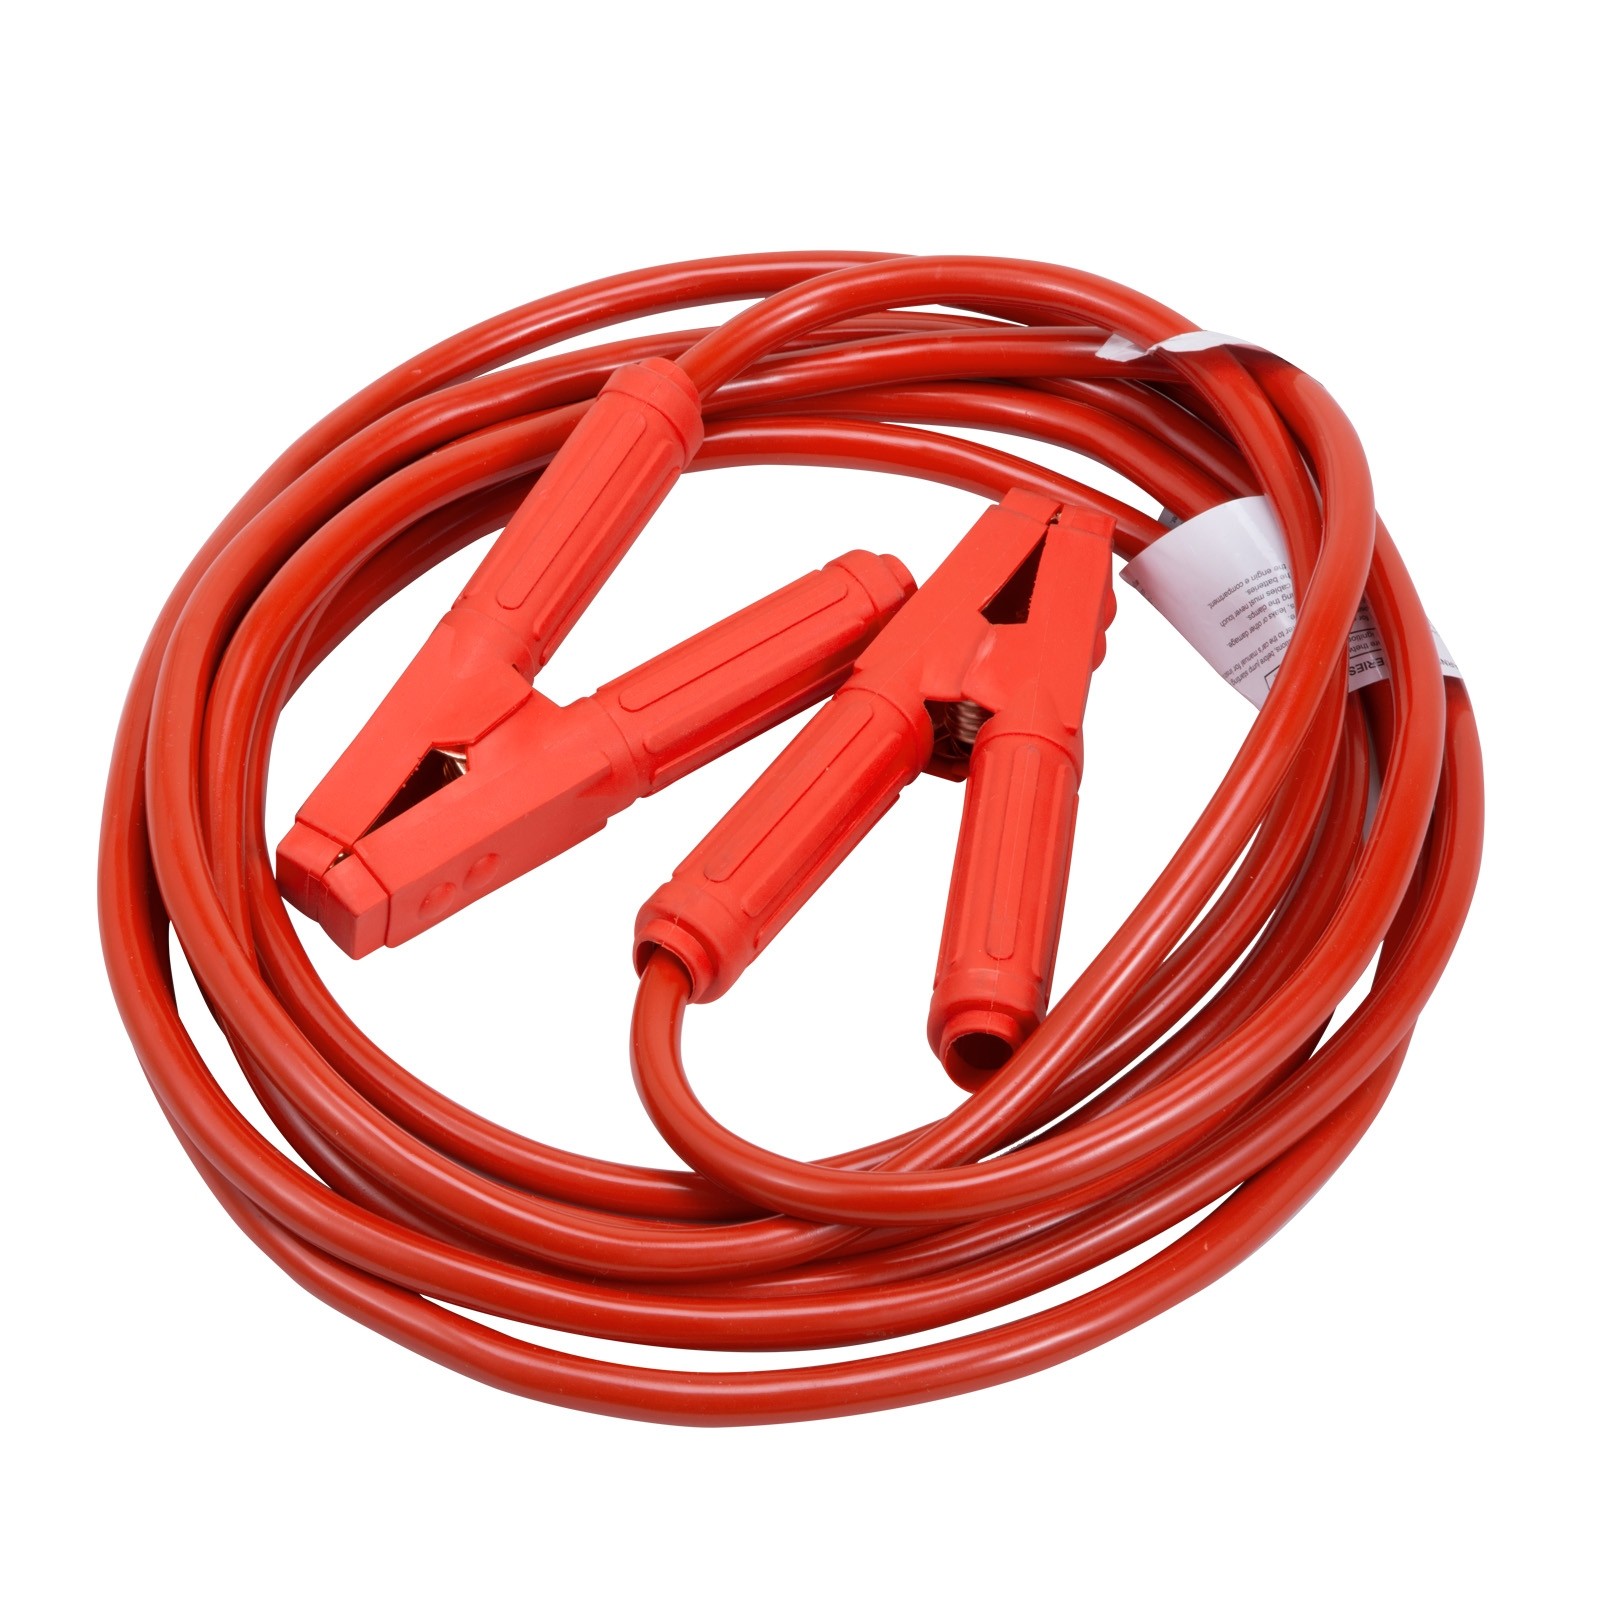 for Car Van Truck Petrol/Diesel Automotive Engines Auto Jumper Cables 1 Gauge 1200AMP 20Ft Heavy Duty Booster Cables 